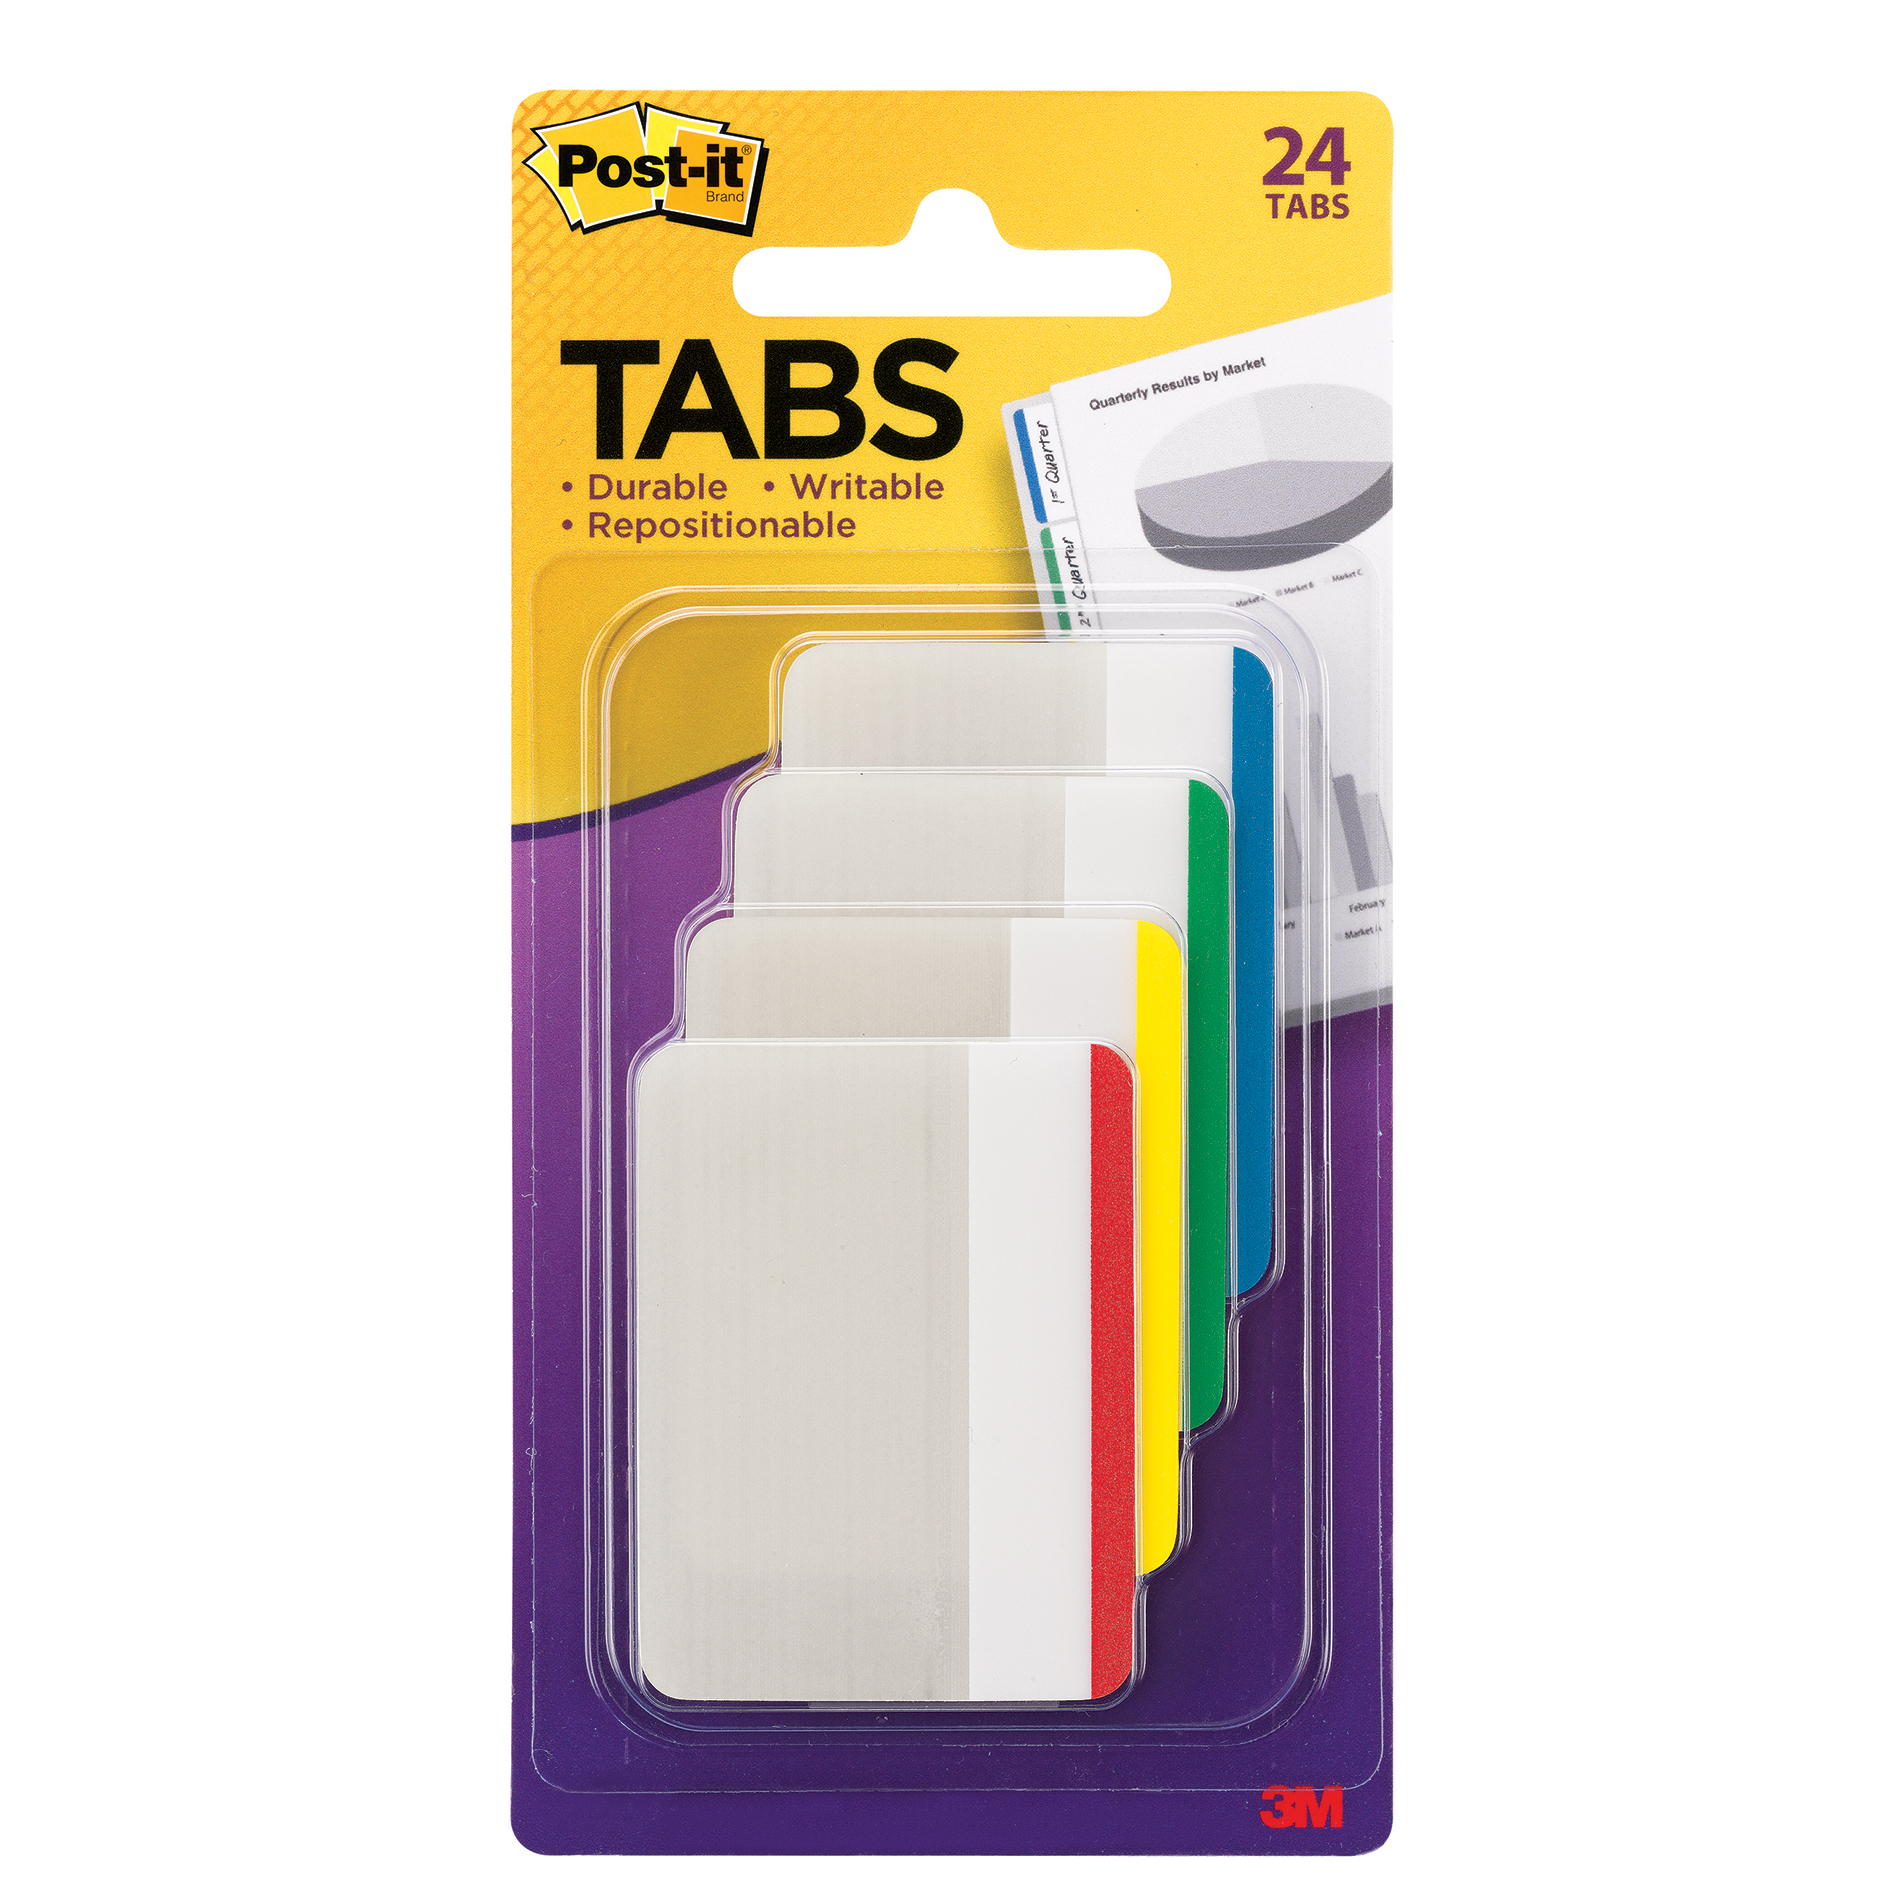 Post-it 21013001   Durable Filing Tabs, 24 Count